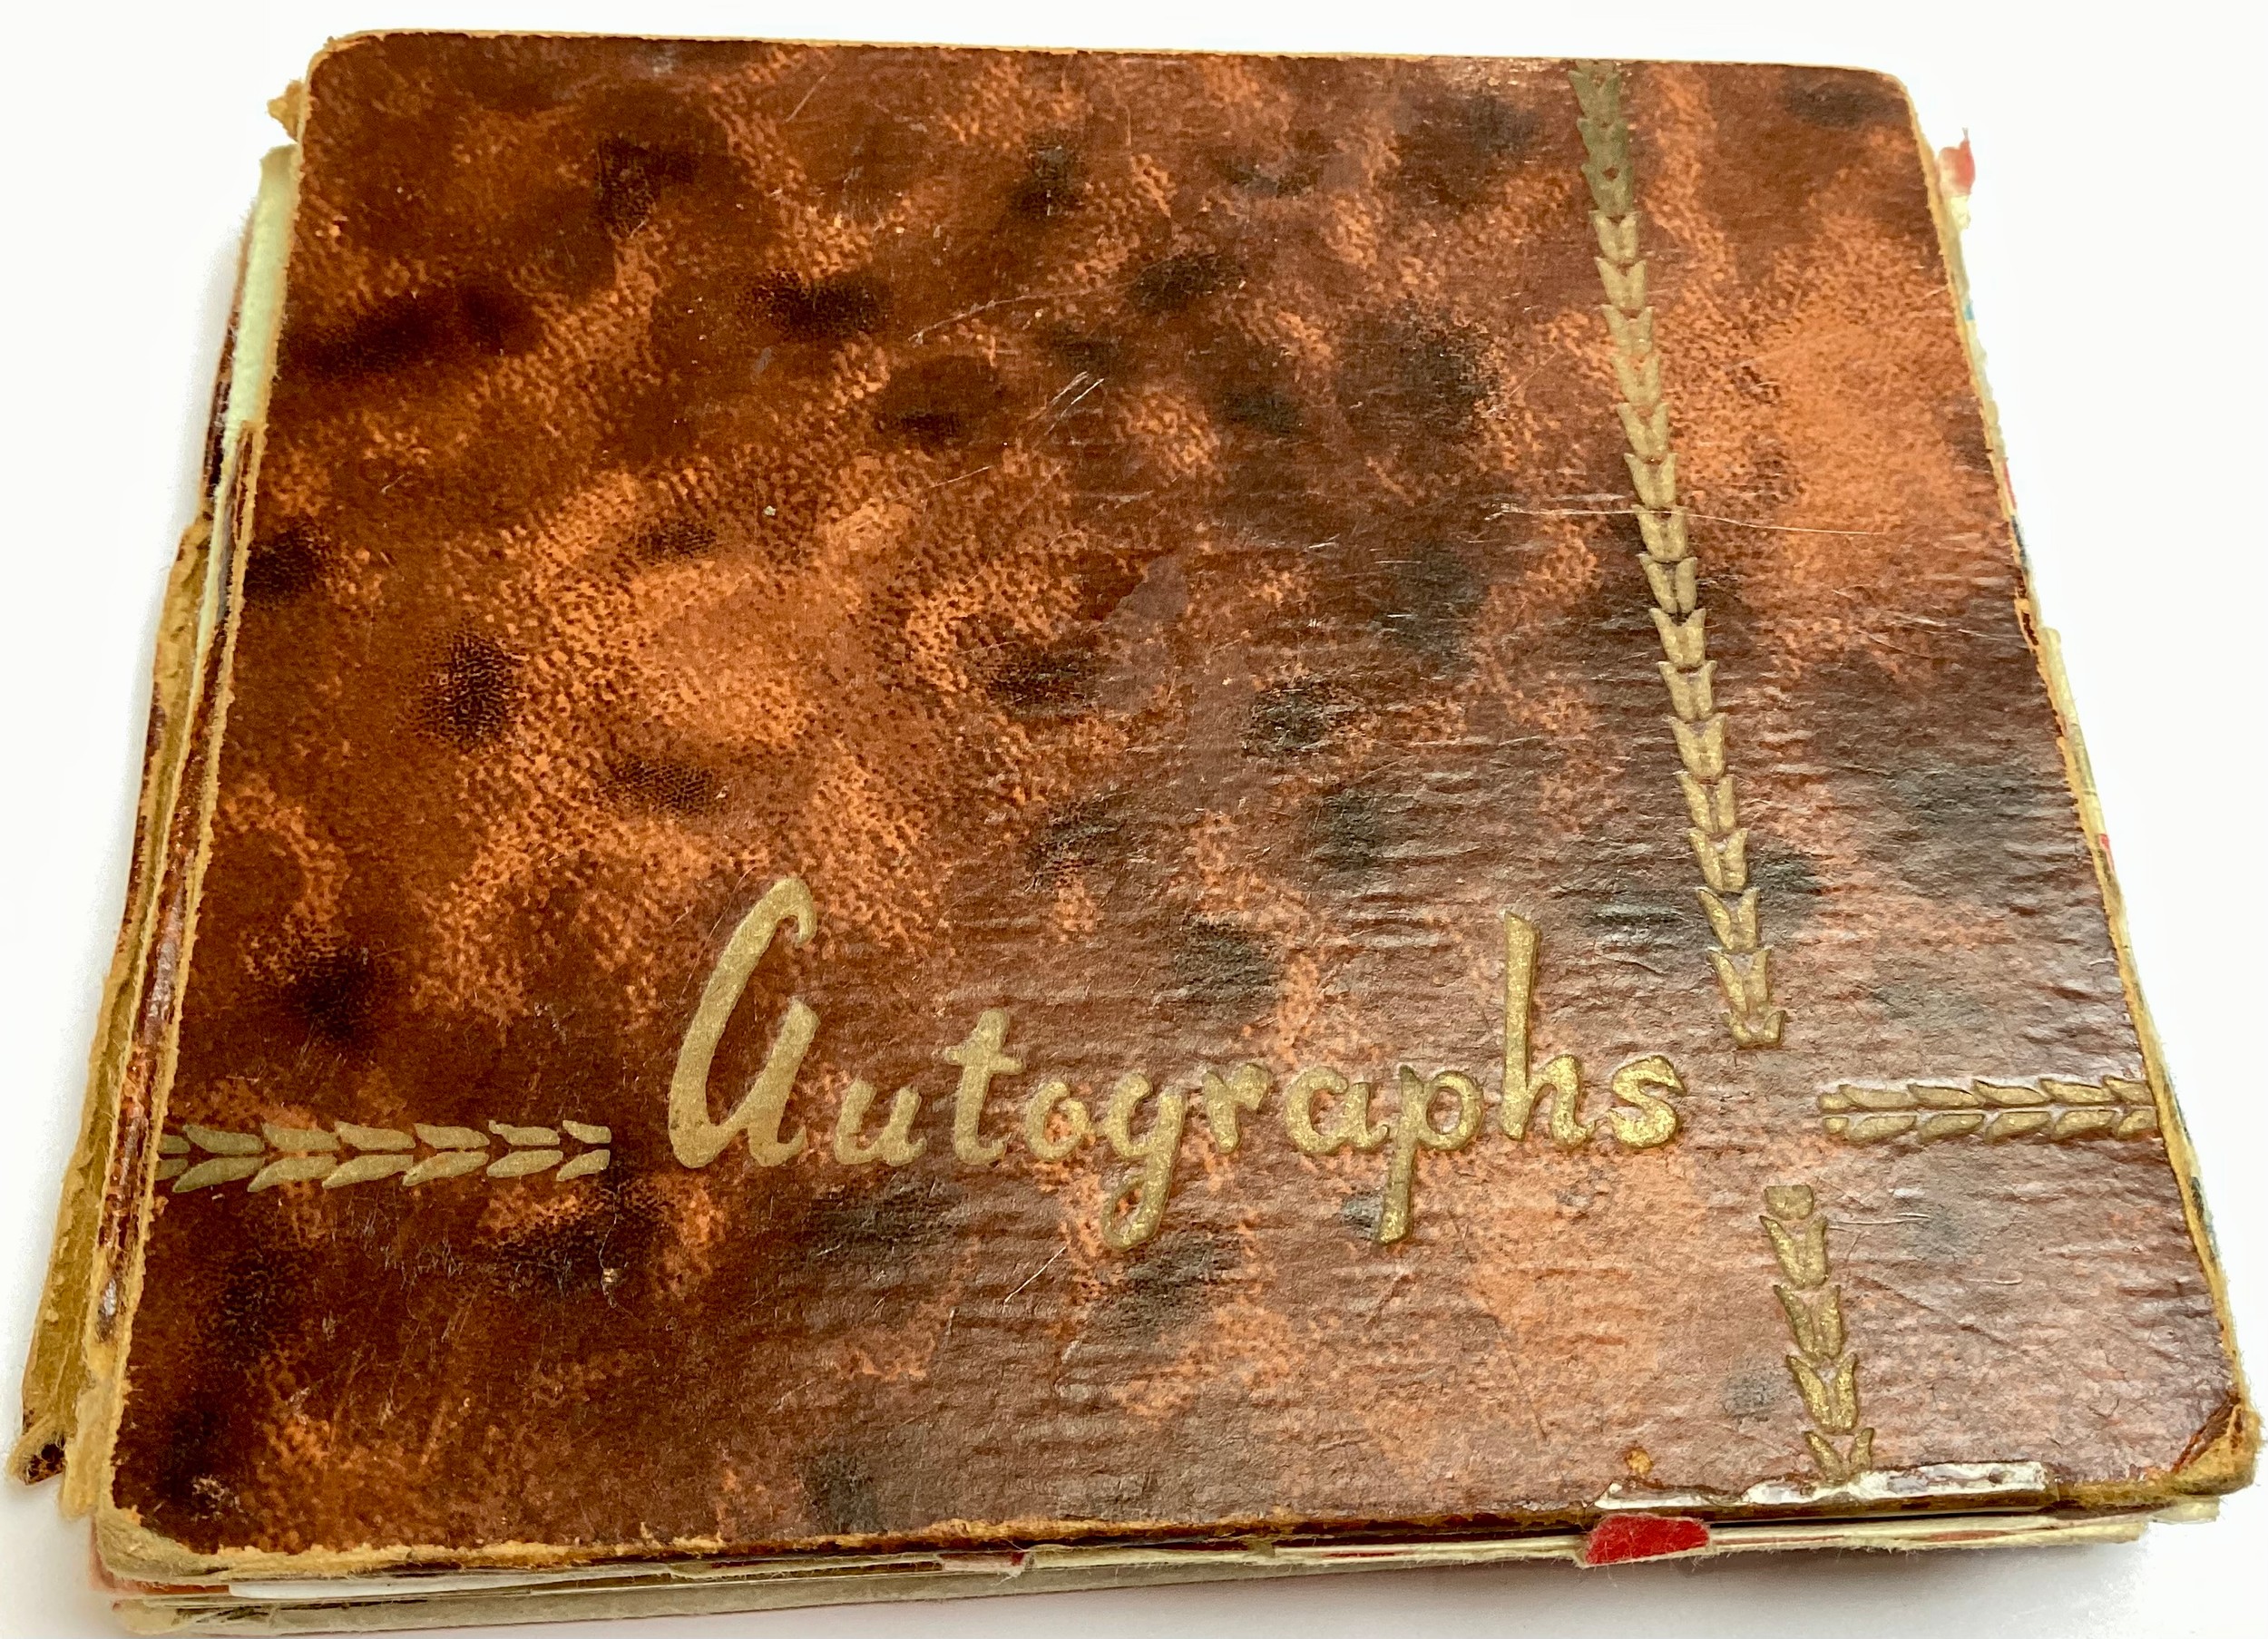 GENUINE 1960’S AUTOGRAPH BOOK CONTAINING VARIOUS POP / ROCK STARS. The book has seen better days